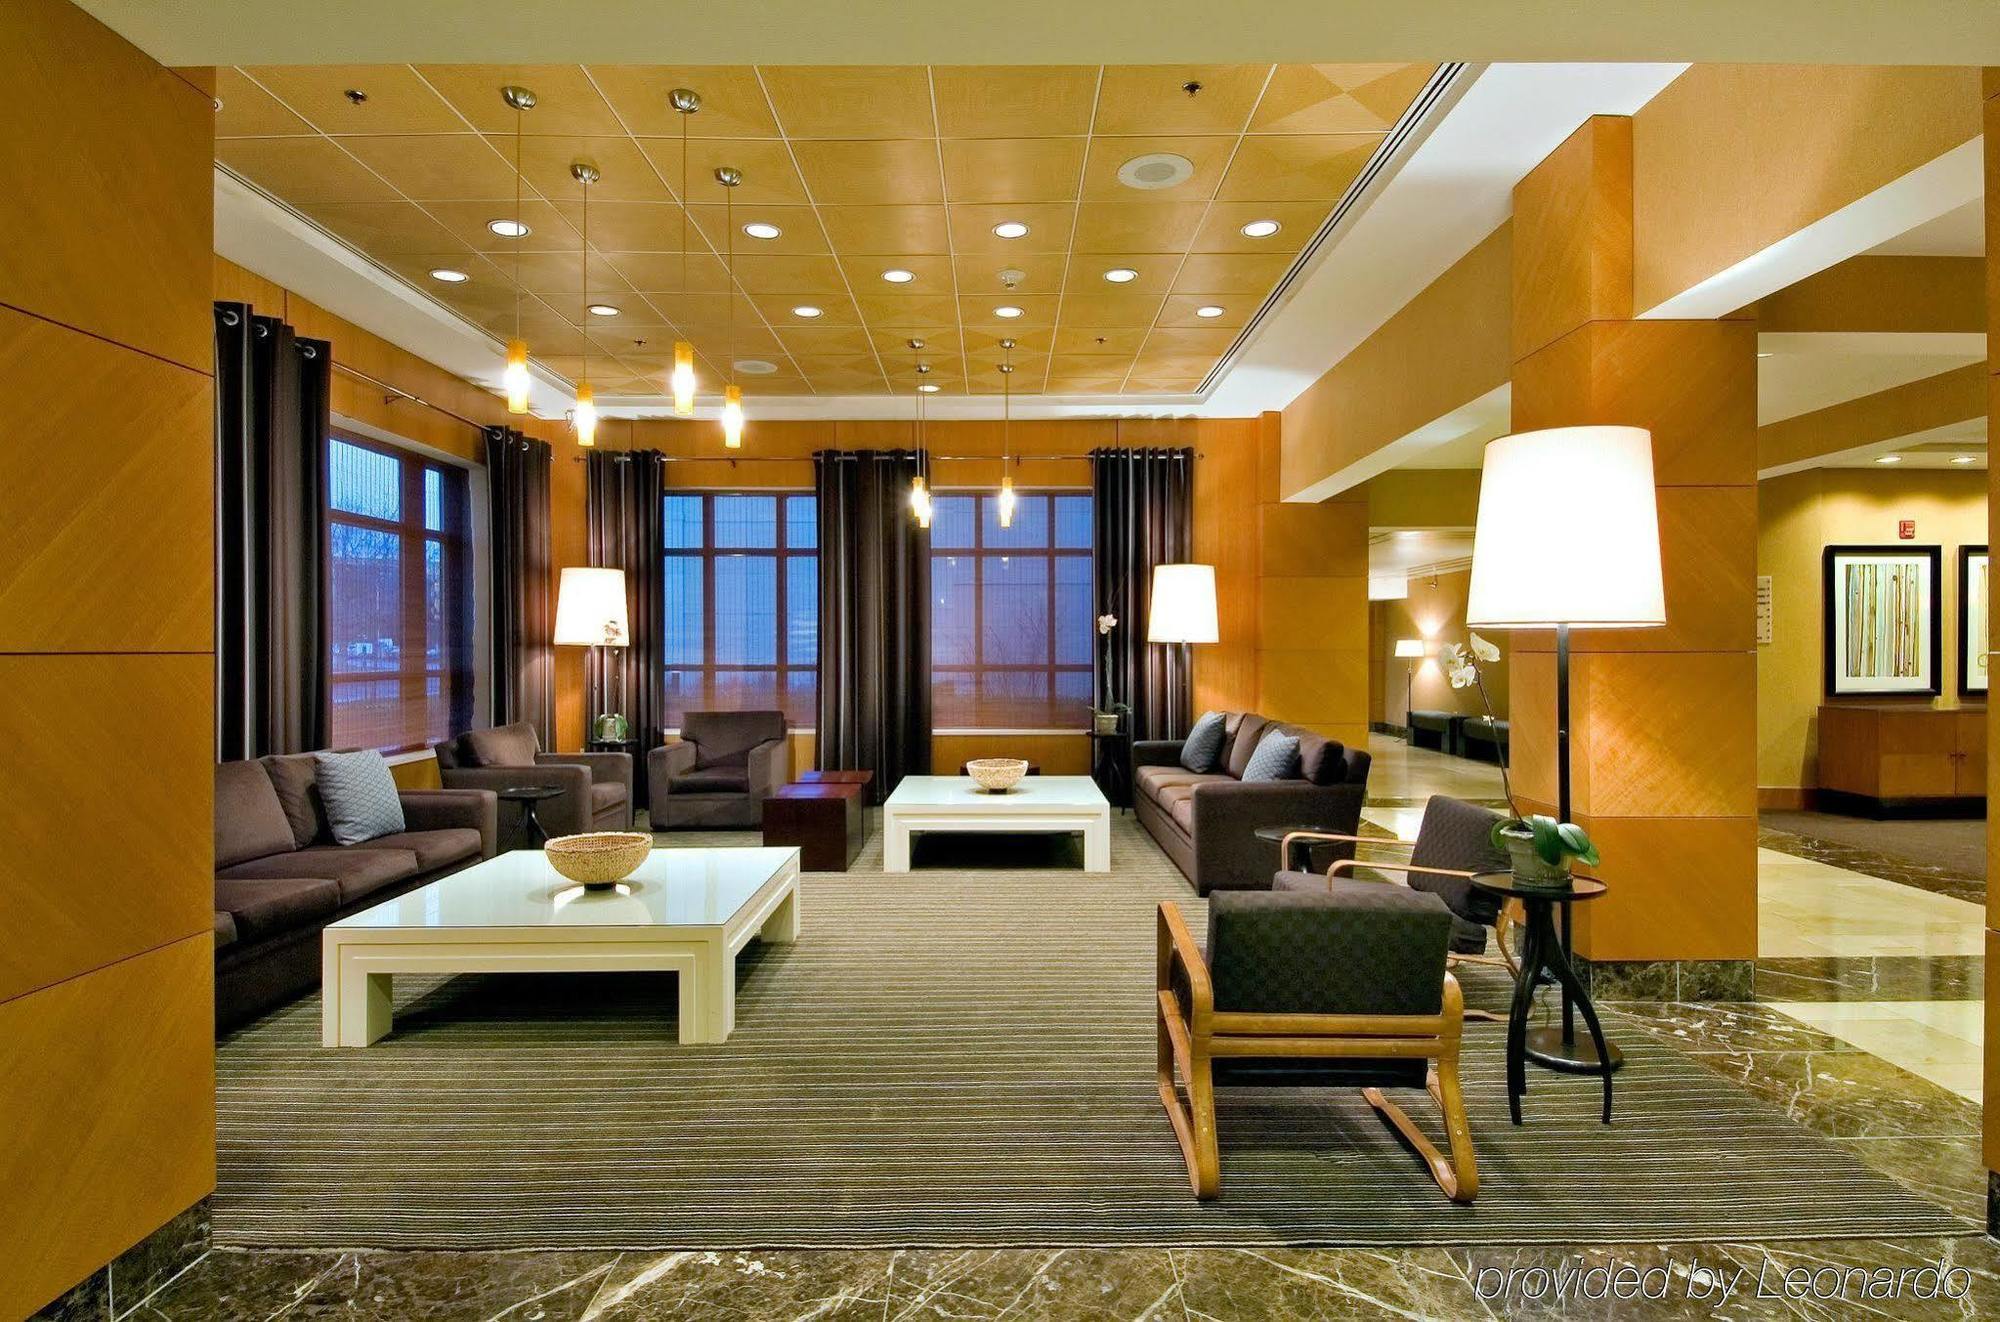 Doubletree By Hilton Chicago - Arlington Heights Hotel Interior photo